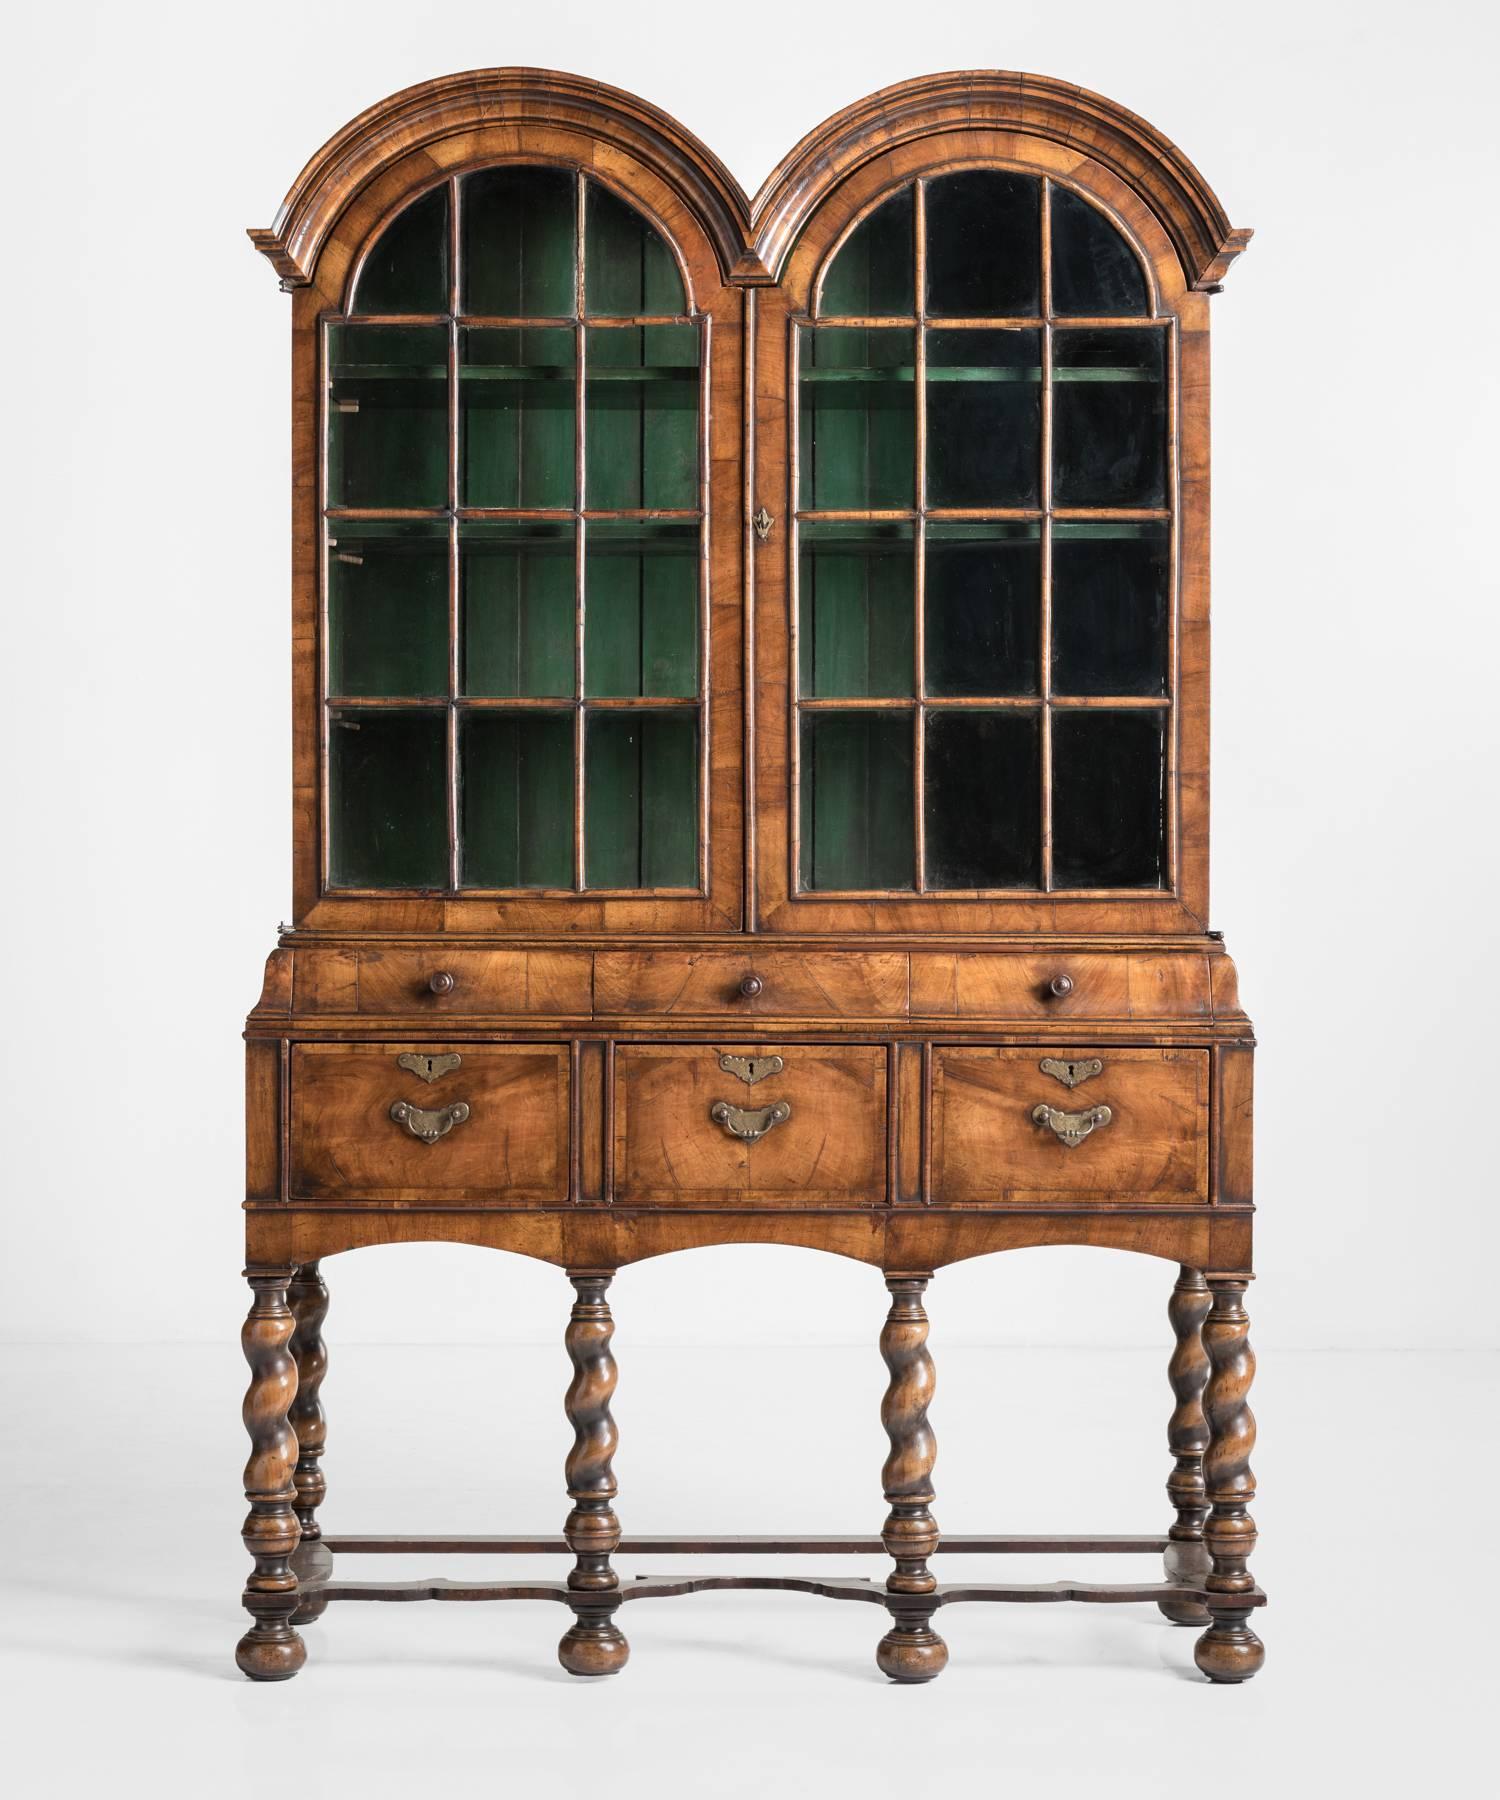 Walnut display cabinet, circa 1890.

Elegant cabinet in the William & Mary Style, with unique twin domed top, turned legs, and striking green painted pine interior.
 